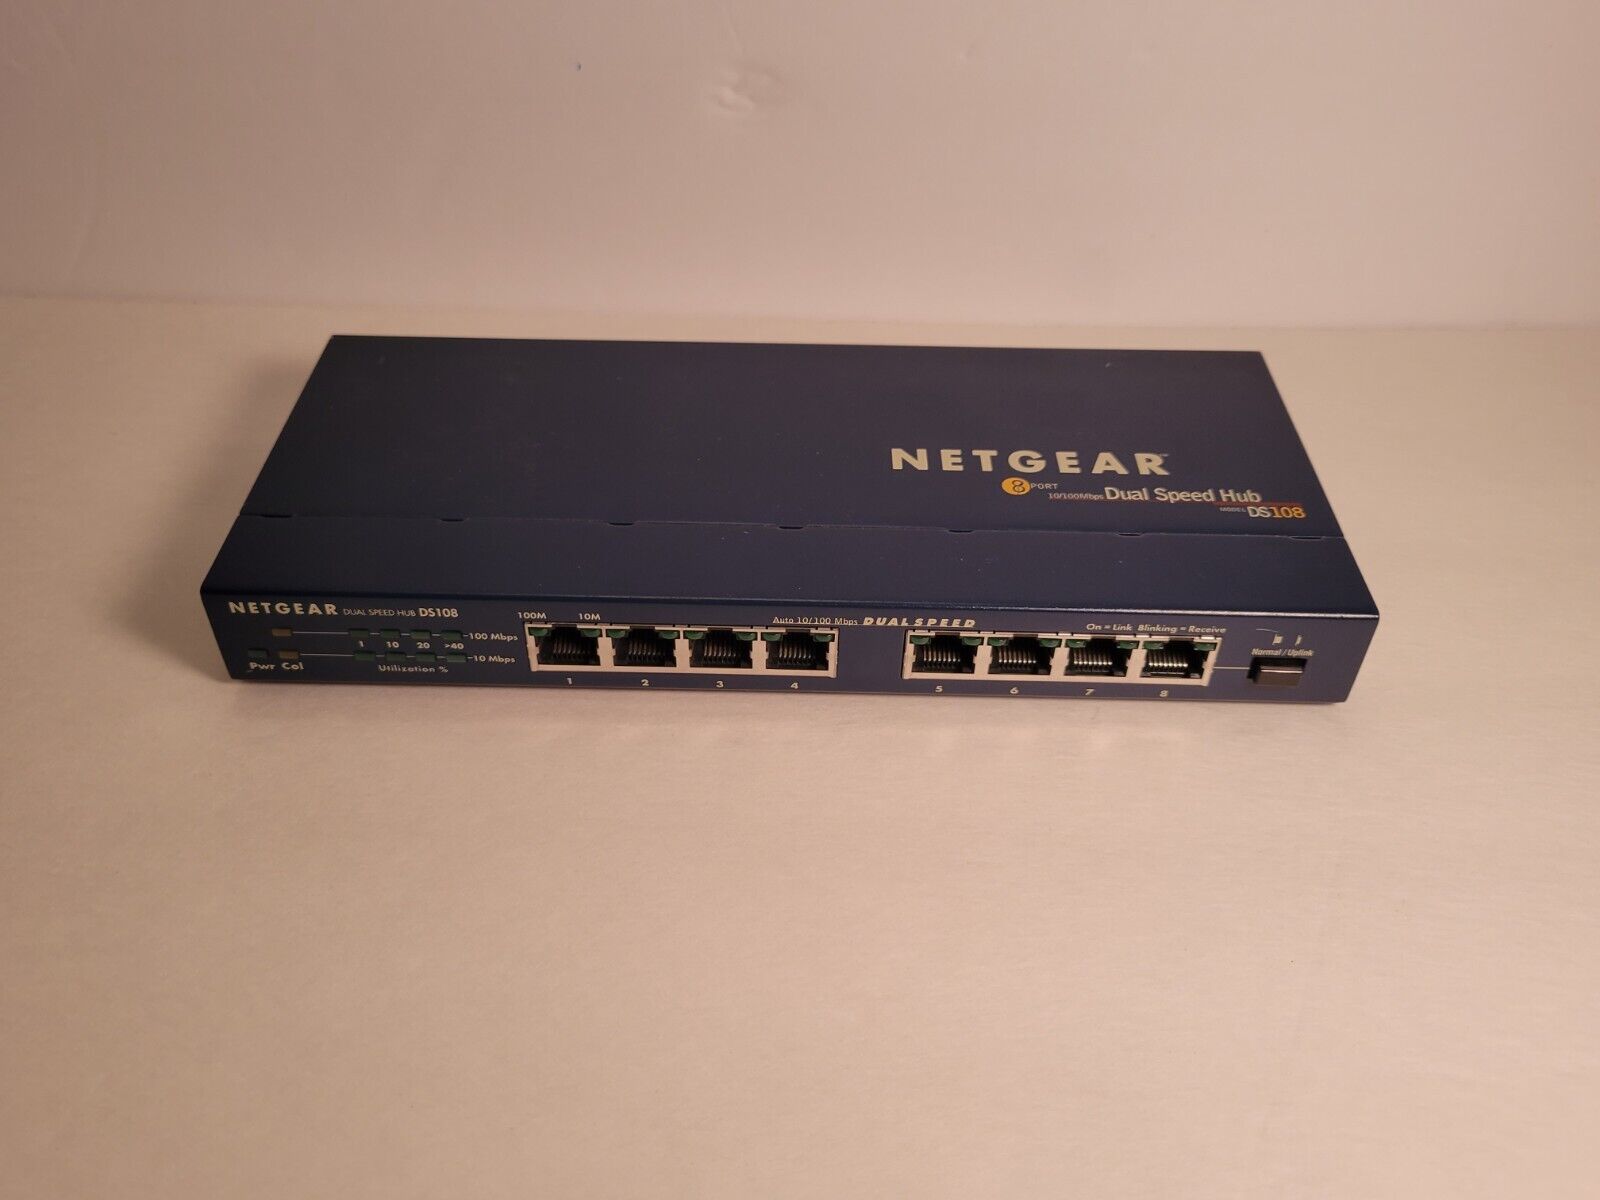 Netgear DS108 8-Port 10/100 Mbps Dual Speed Hub Network Switch NO Power Cord